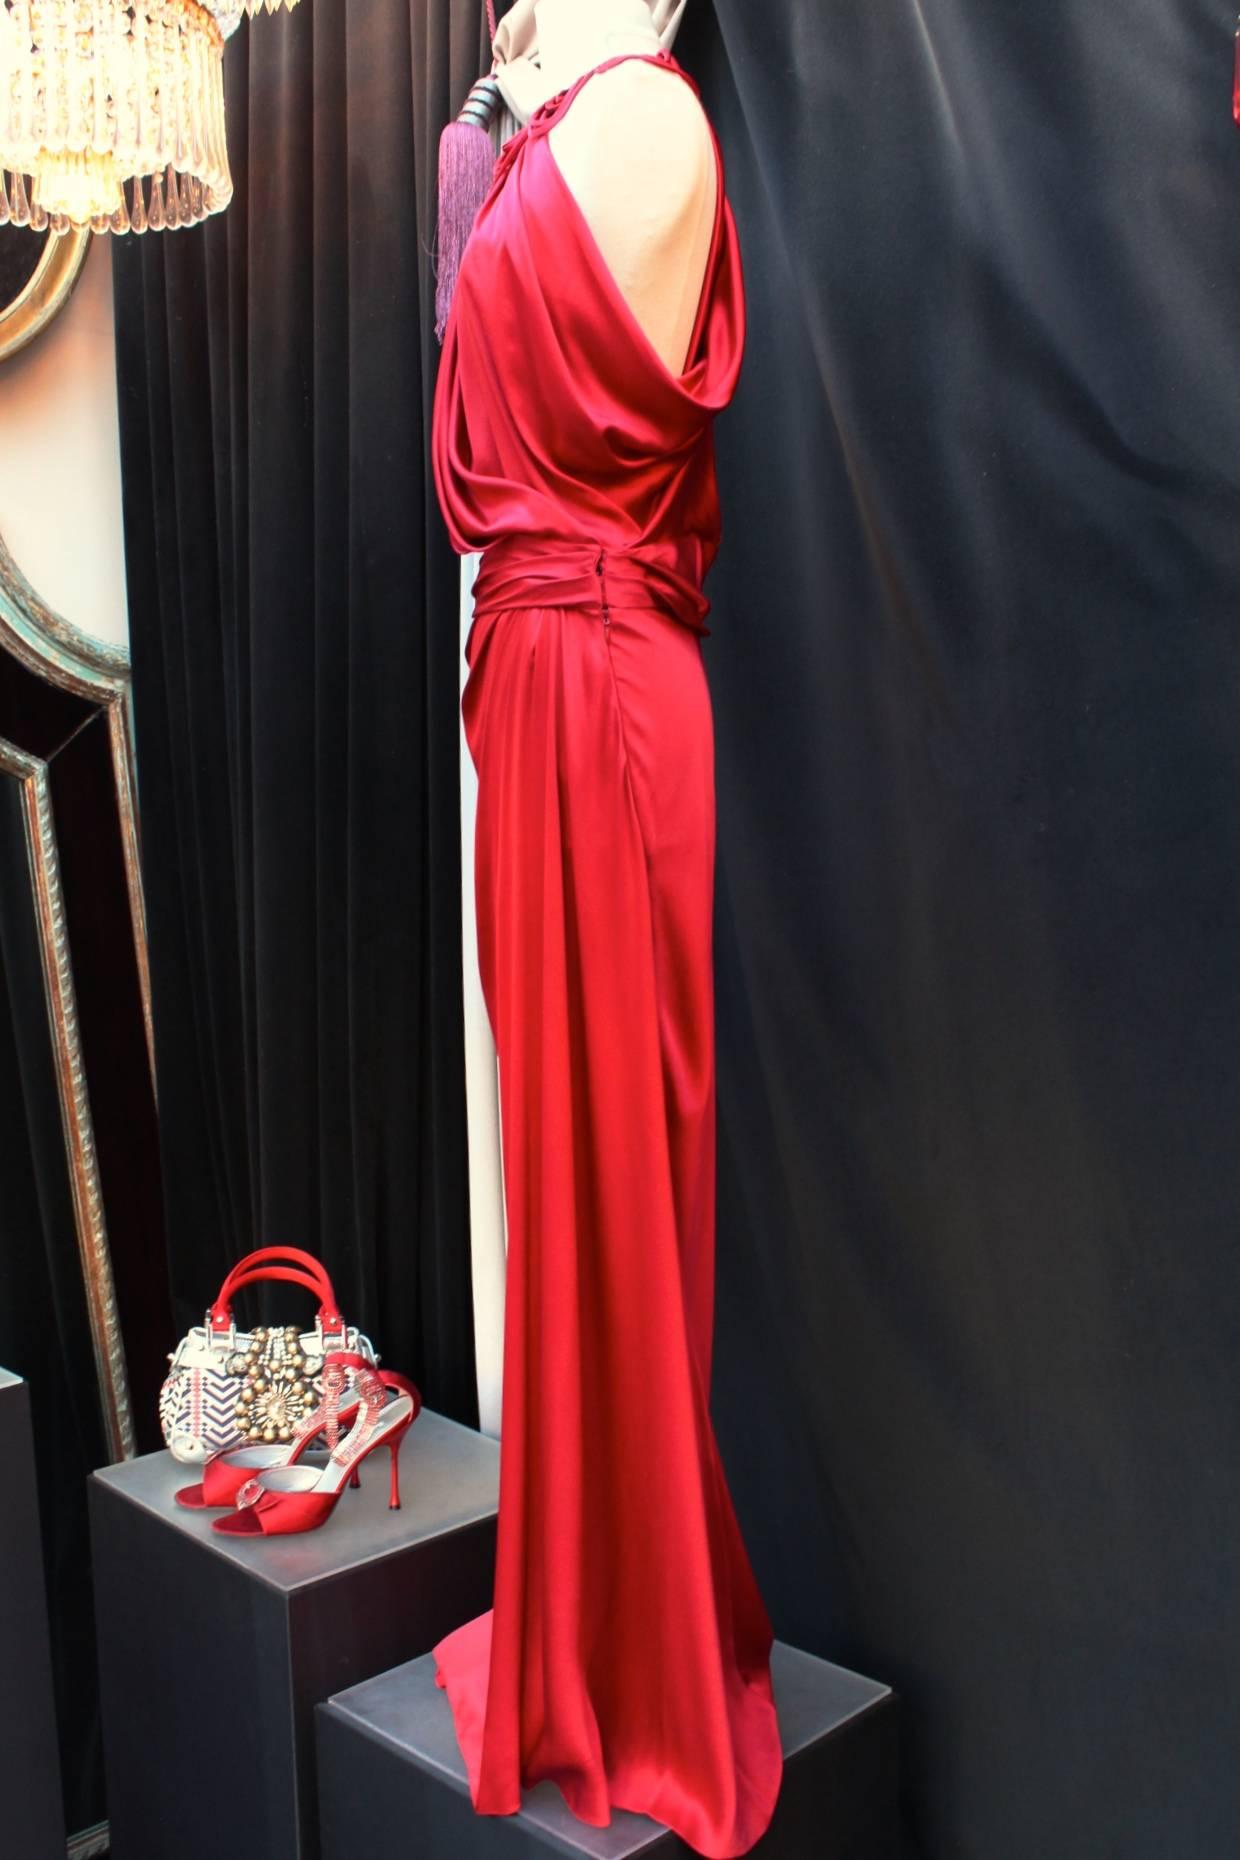 JOHN GALLIANO (Made in Italy) Red silk evening gown constructed with a stylized collar, a loose top with a V neck and crossing pans of silk in the back. The dress has also an asymmetrical waist band and skirt. 

Very beautiful and sexy gown.